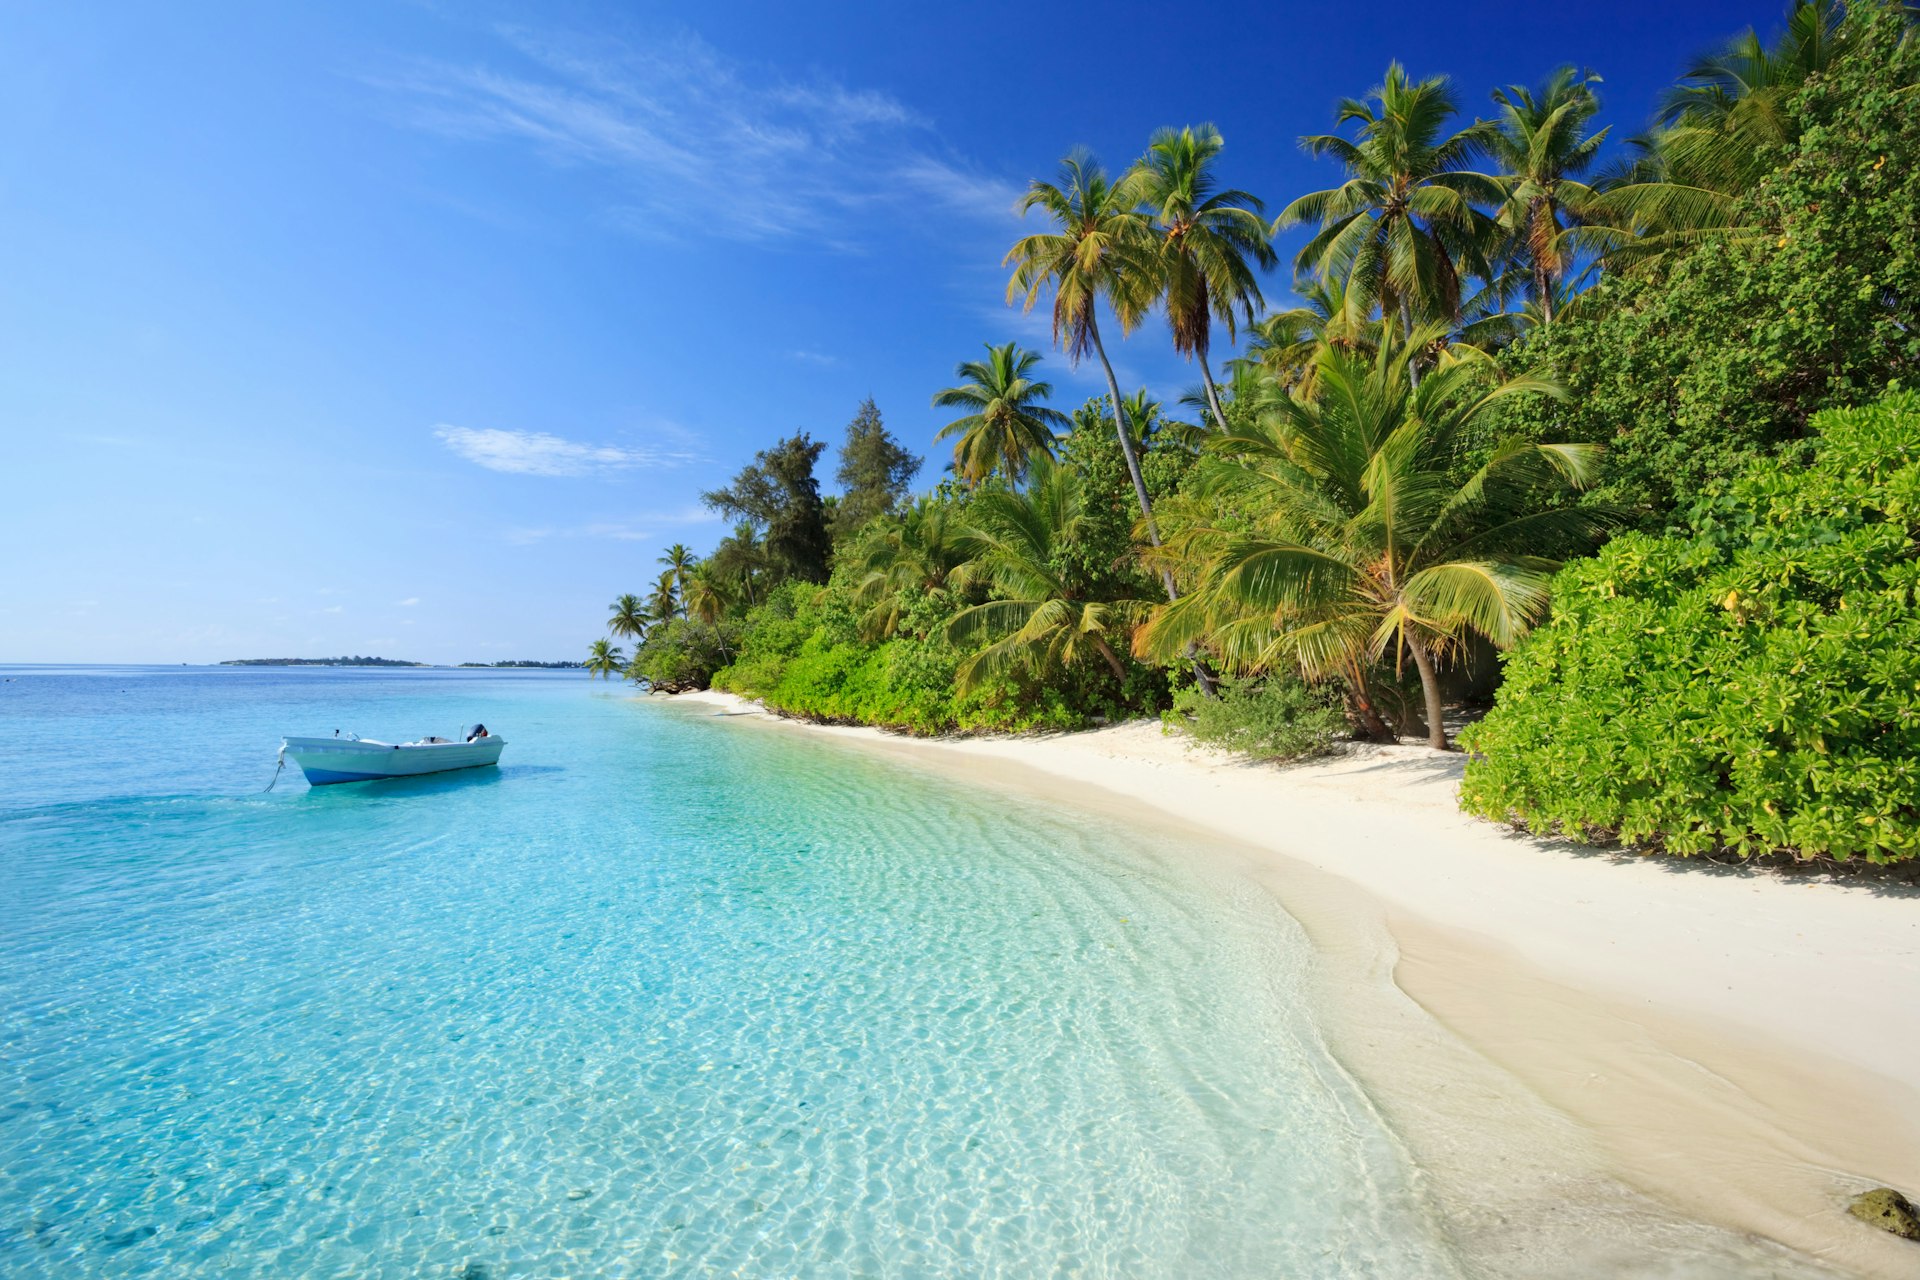 Your archetypal island paradise: just another day in the Maldives © Matteo Colombo / Getty Images